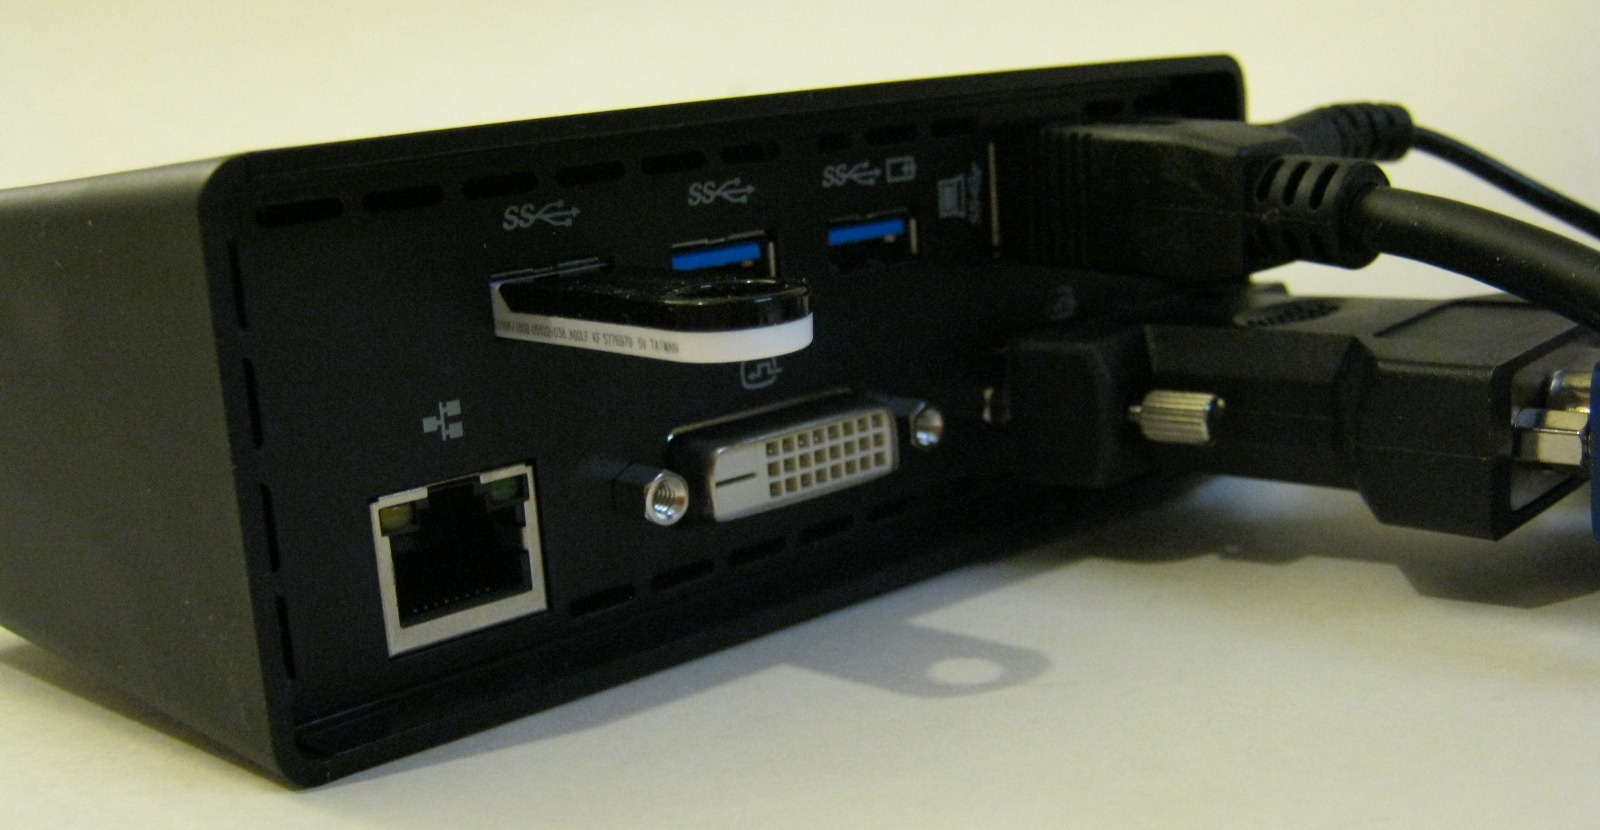 USB Station in Review: Lenovo USB 3.0 0A33970 - NotebookCheck.net Reviews